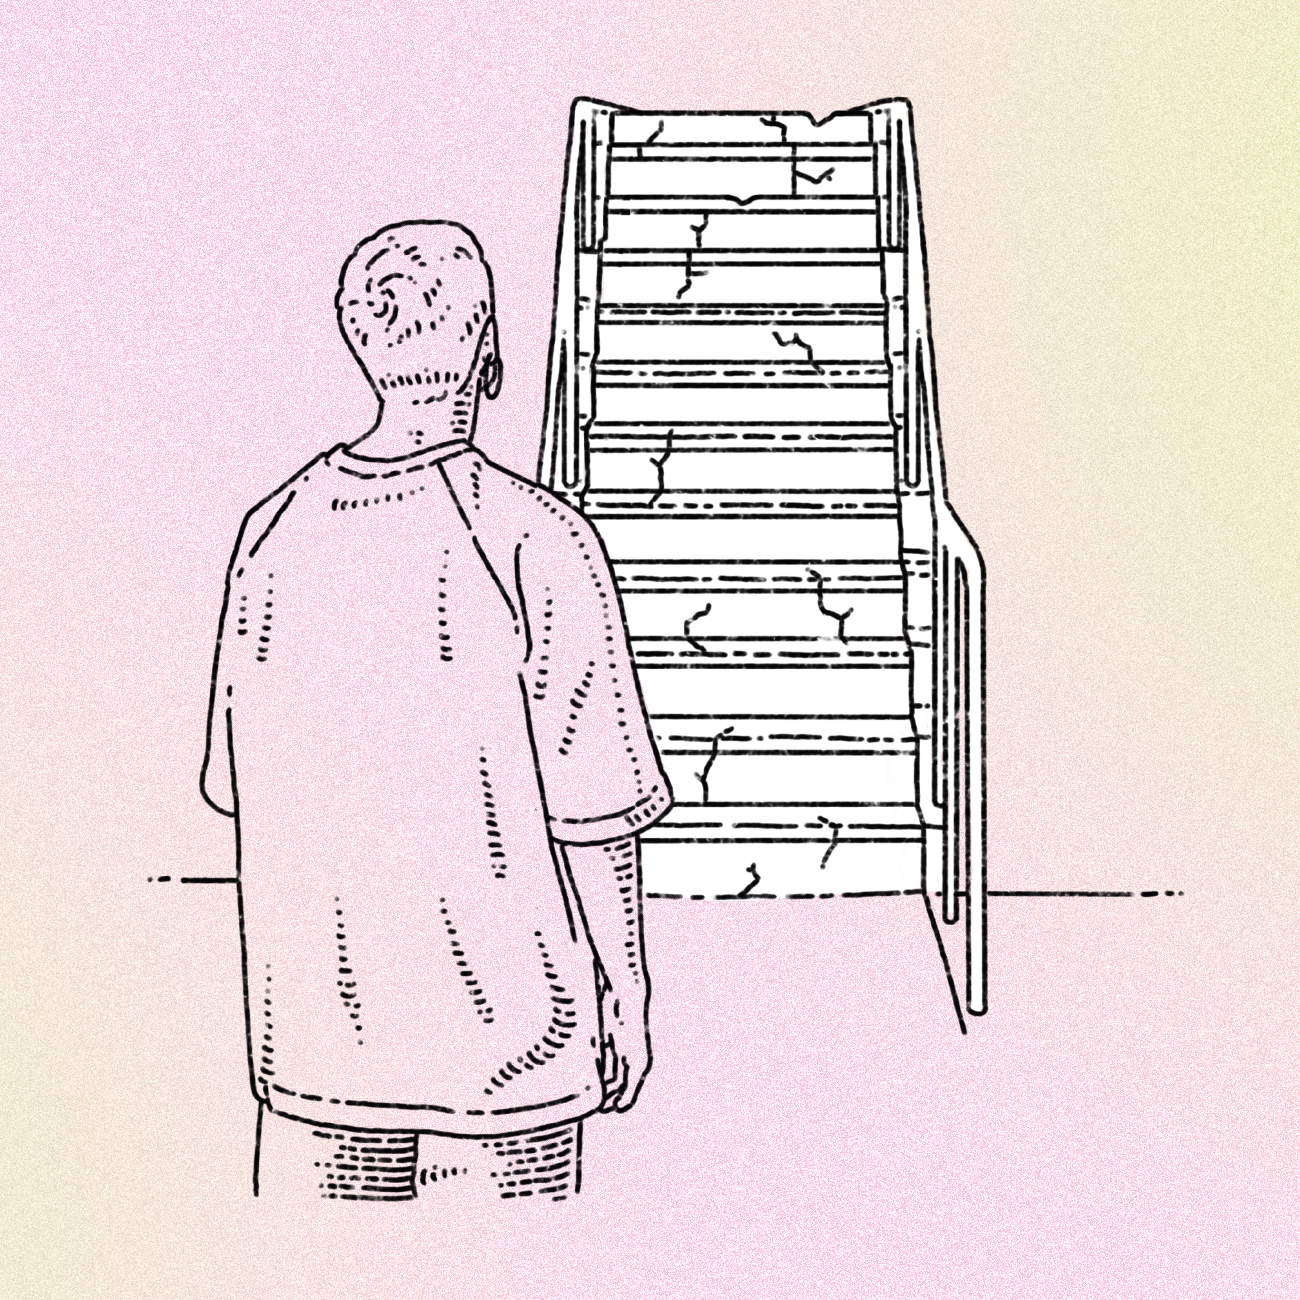 A person looking at a flight of broken, unstable stairs.